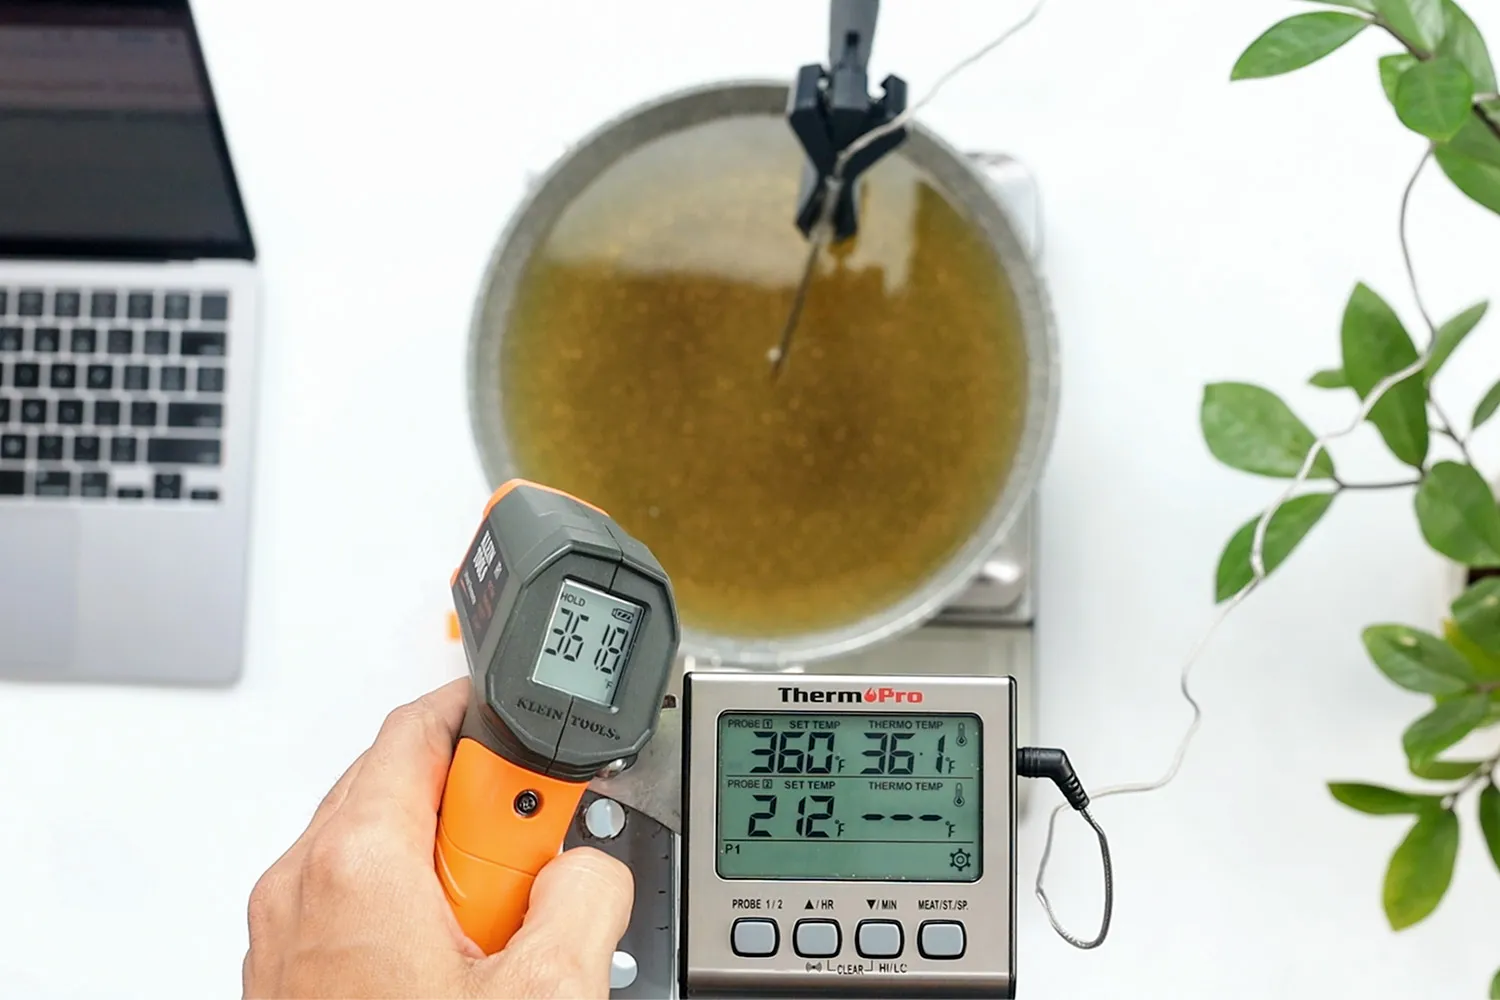 https://cdn.healthykitchen101.com/reviews/images/thermometers/klein-tools-ir1-infrared-thermometer-hot-test-with-cooking-oil-clhpswfb30008ow883imjcnj7.jpg